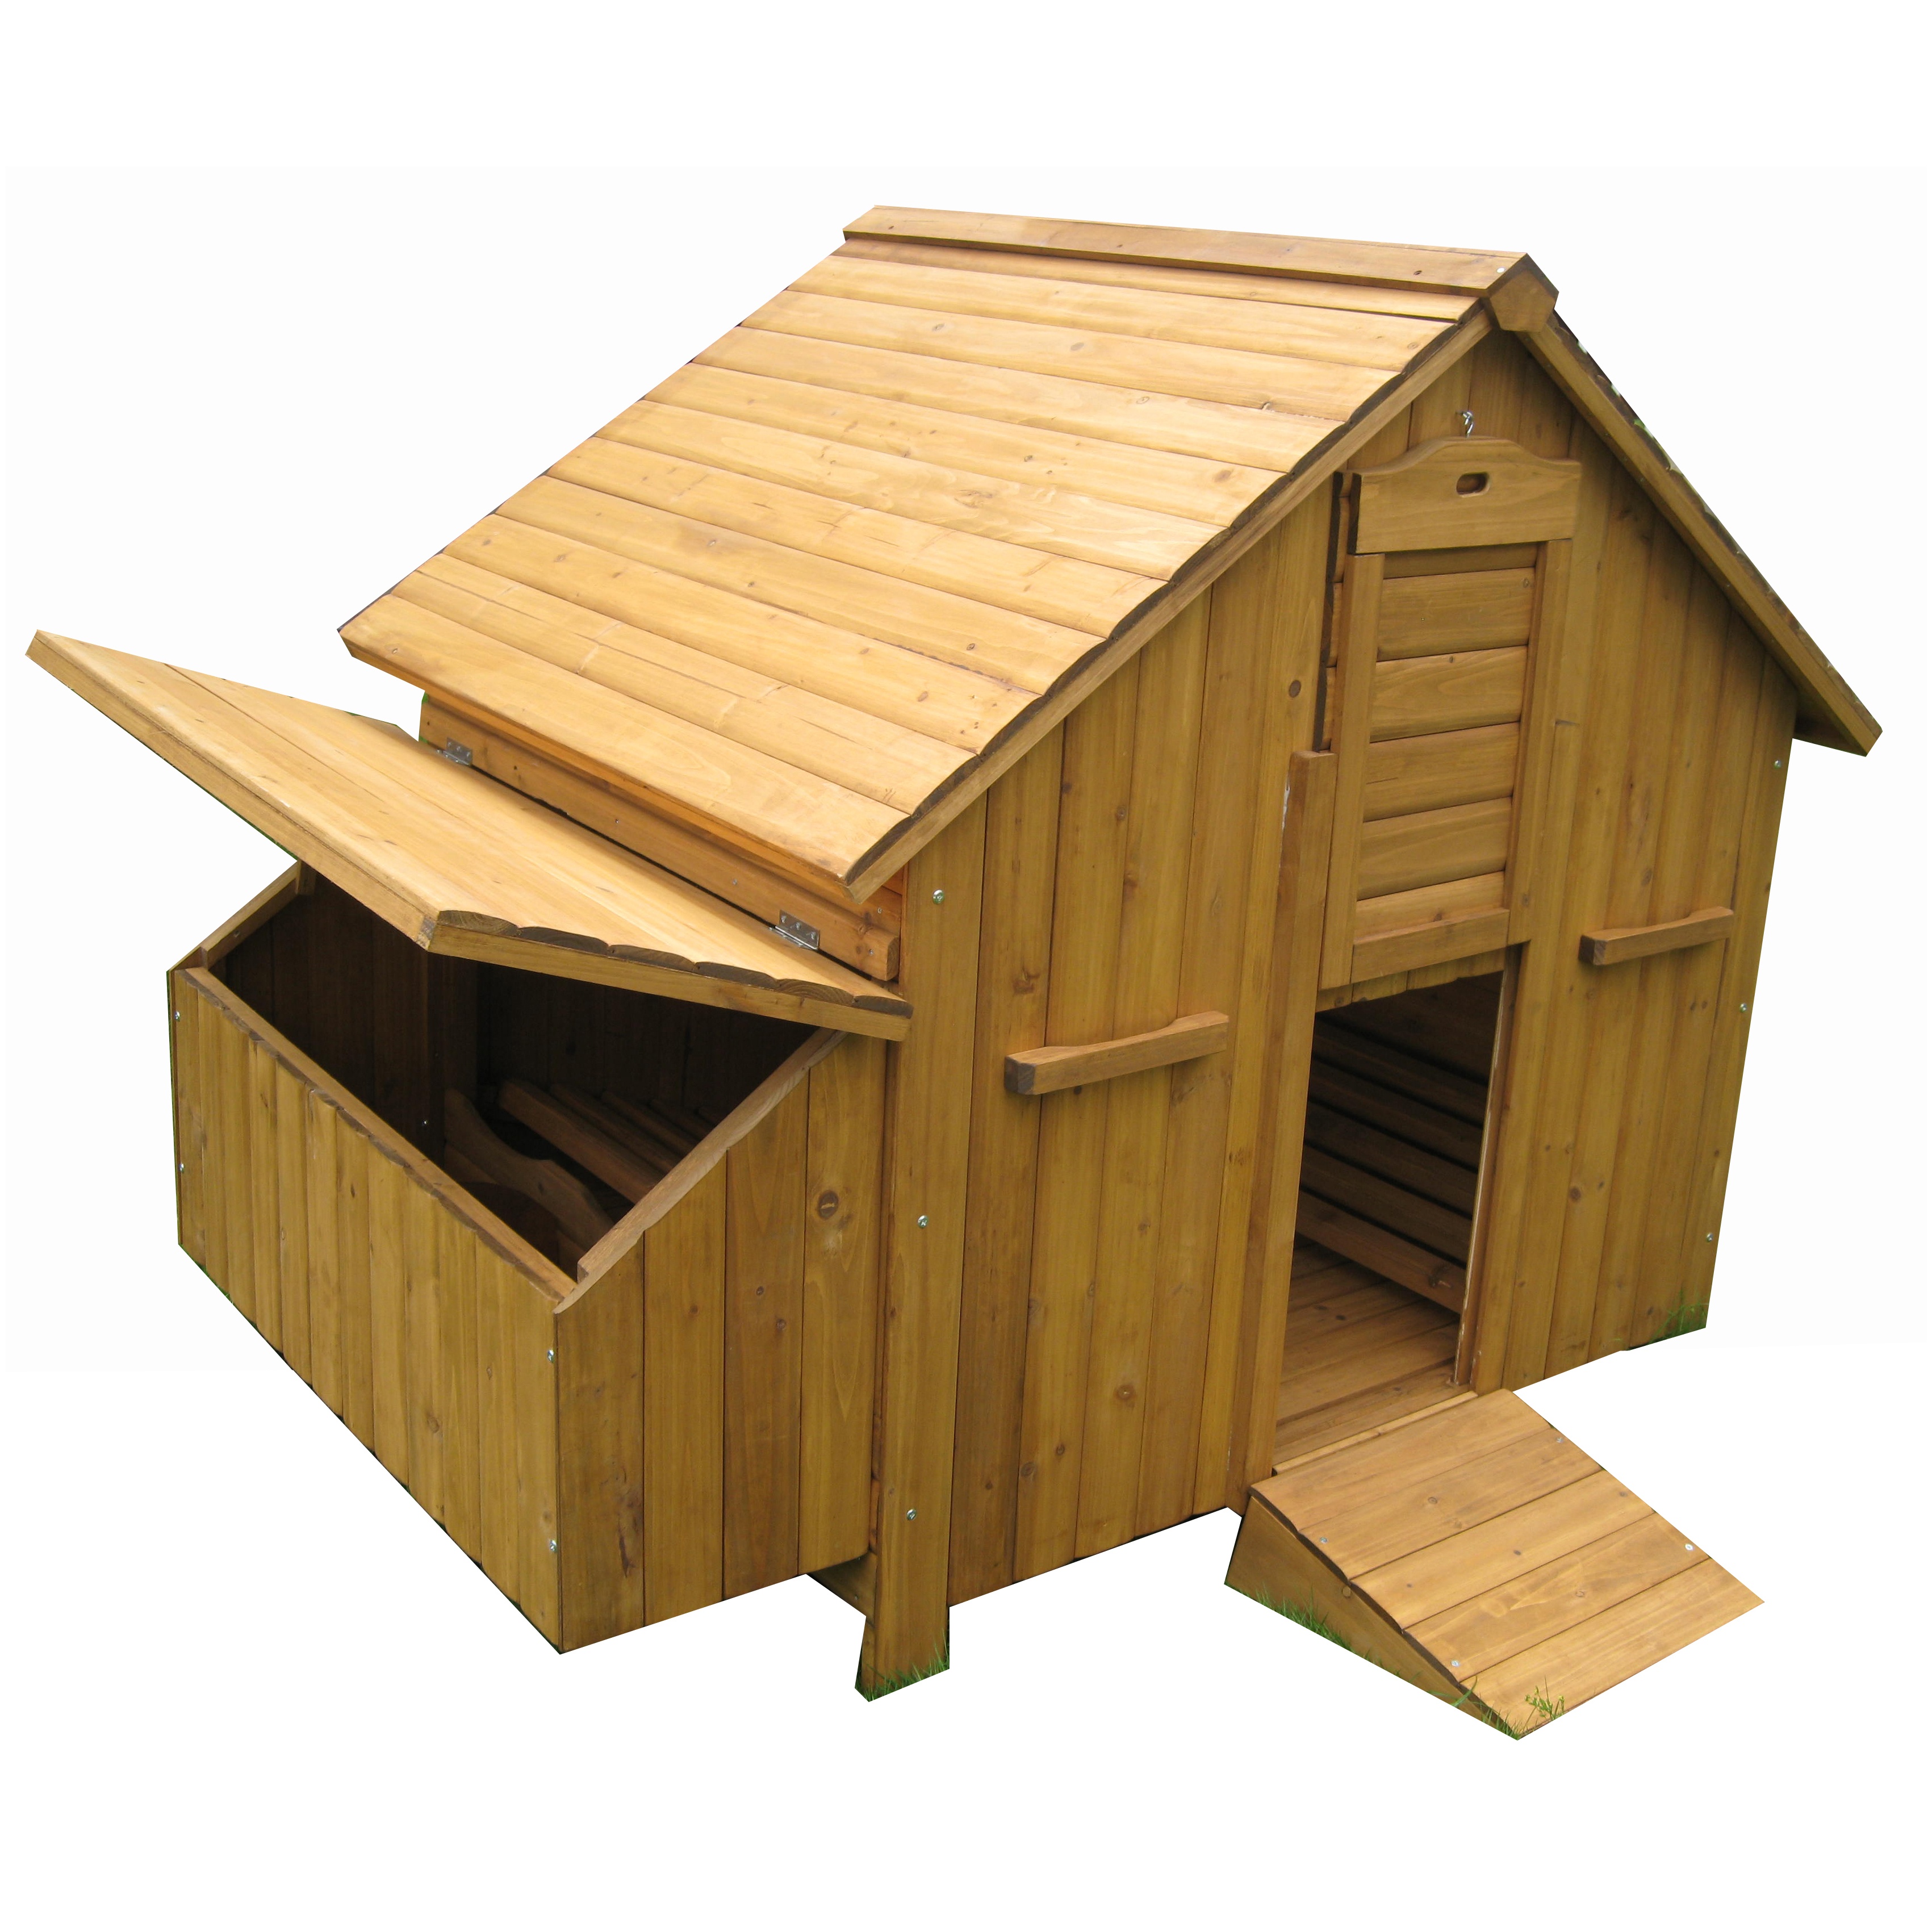 OEM Supply Boy Dog Diapers -
 Industrial custom DIY OEM brand Outdoor Cheap broiler hen egg laying Wooden Chicken Coop for sale – Easy